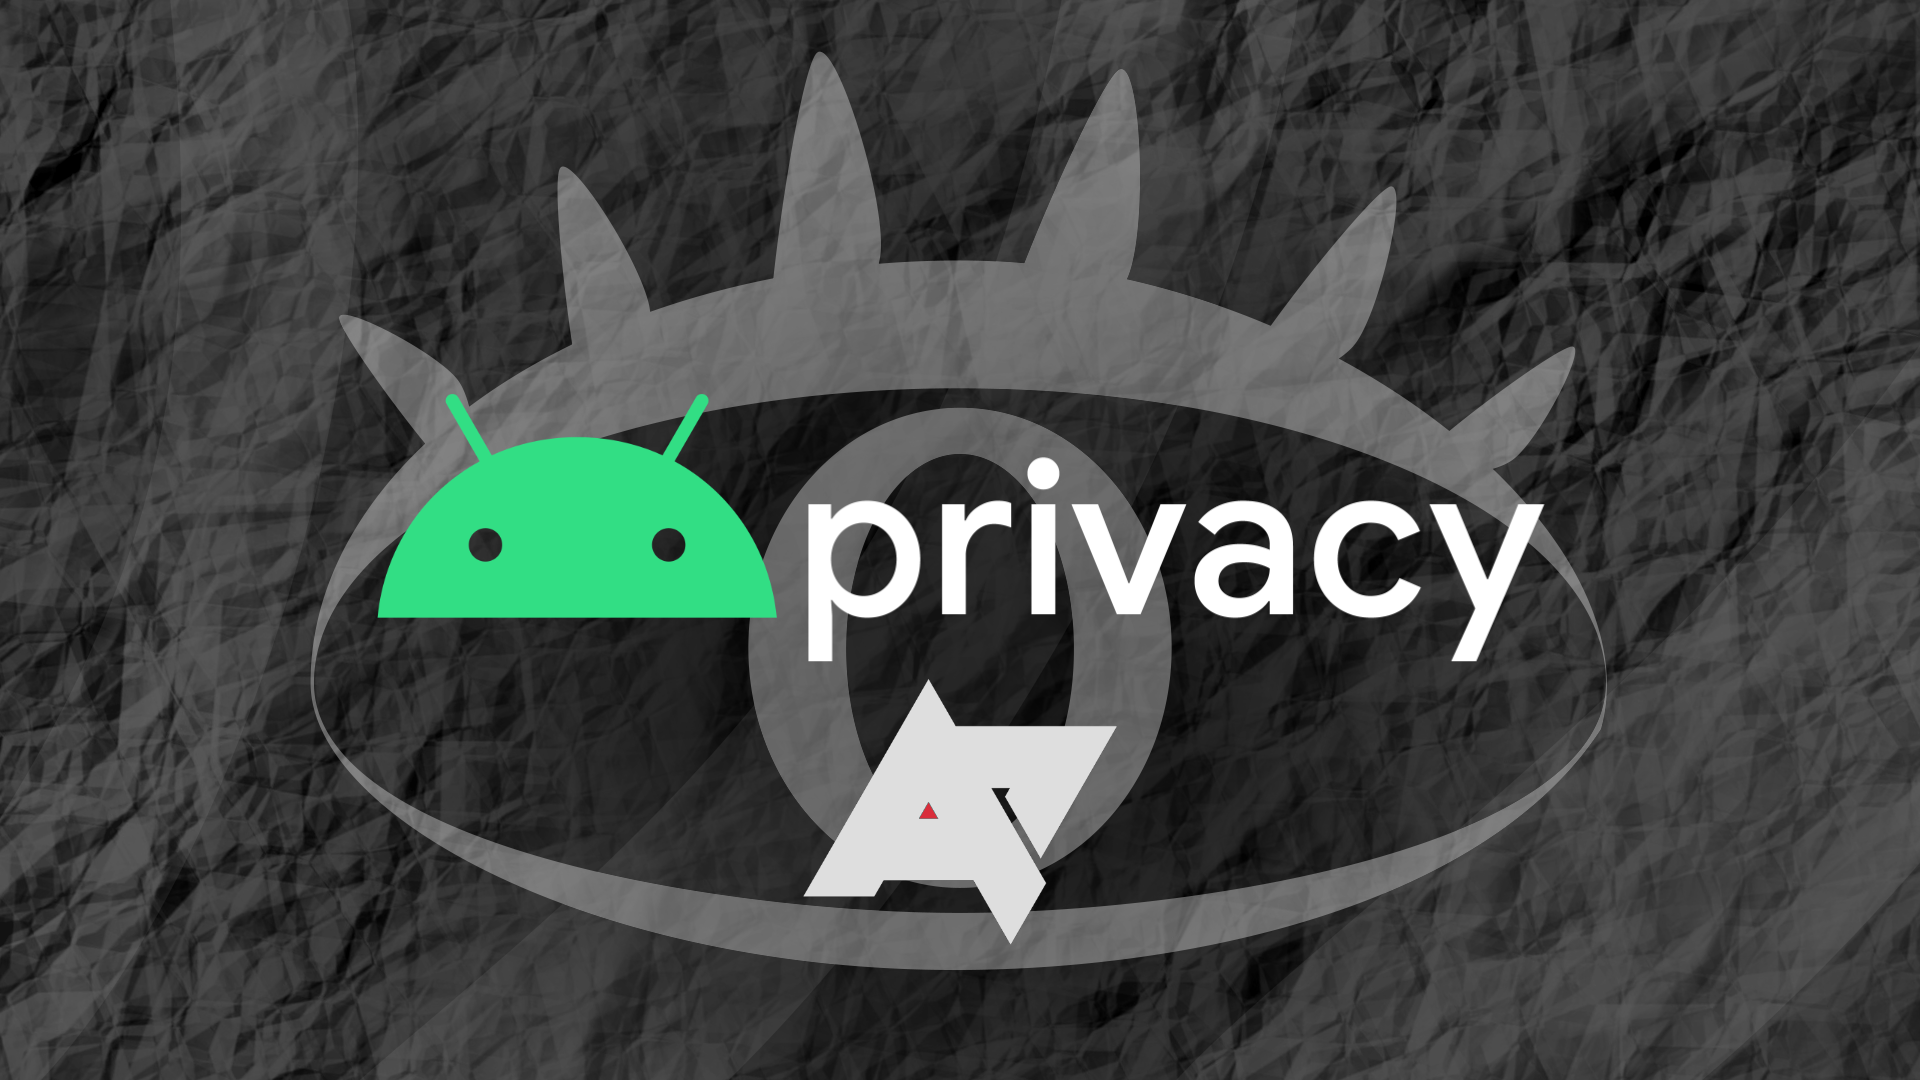 Android and Android Police logos over an image of an eye denoting privacy